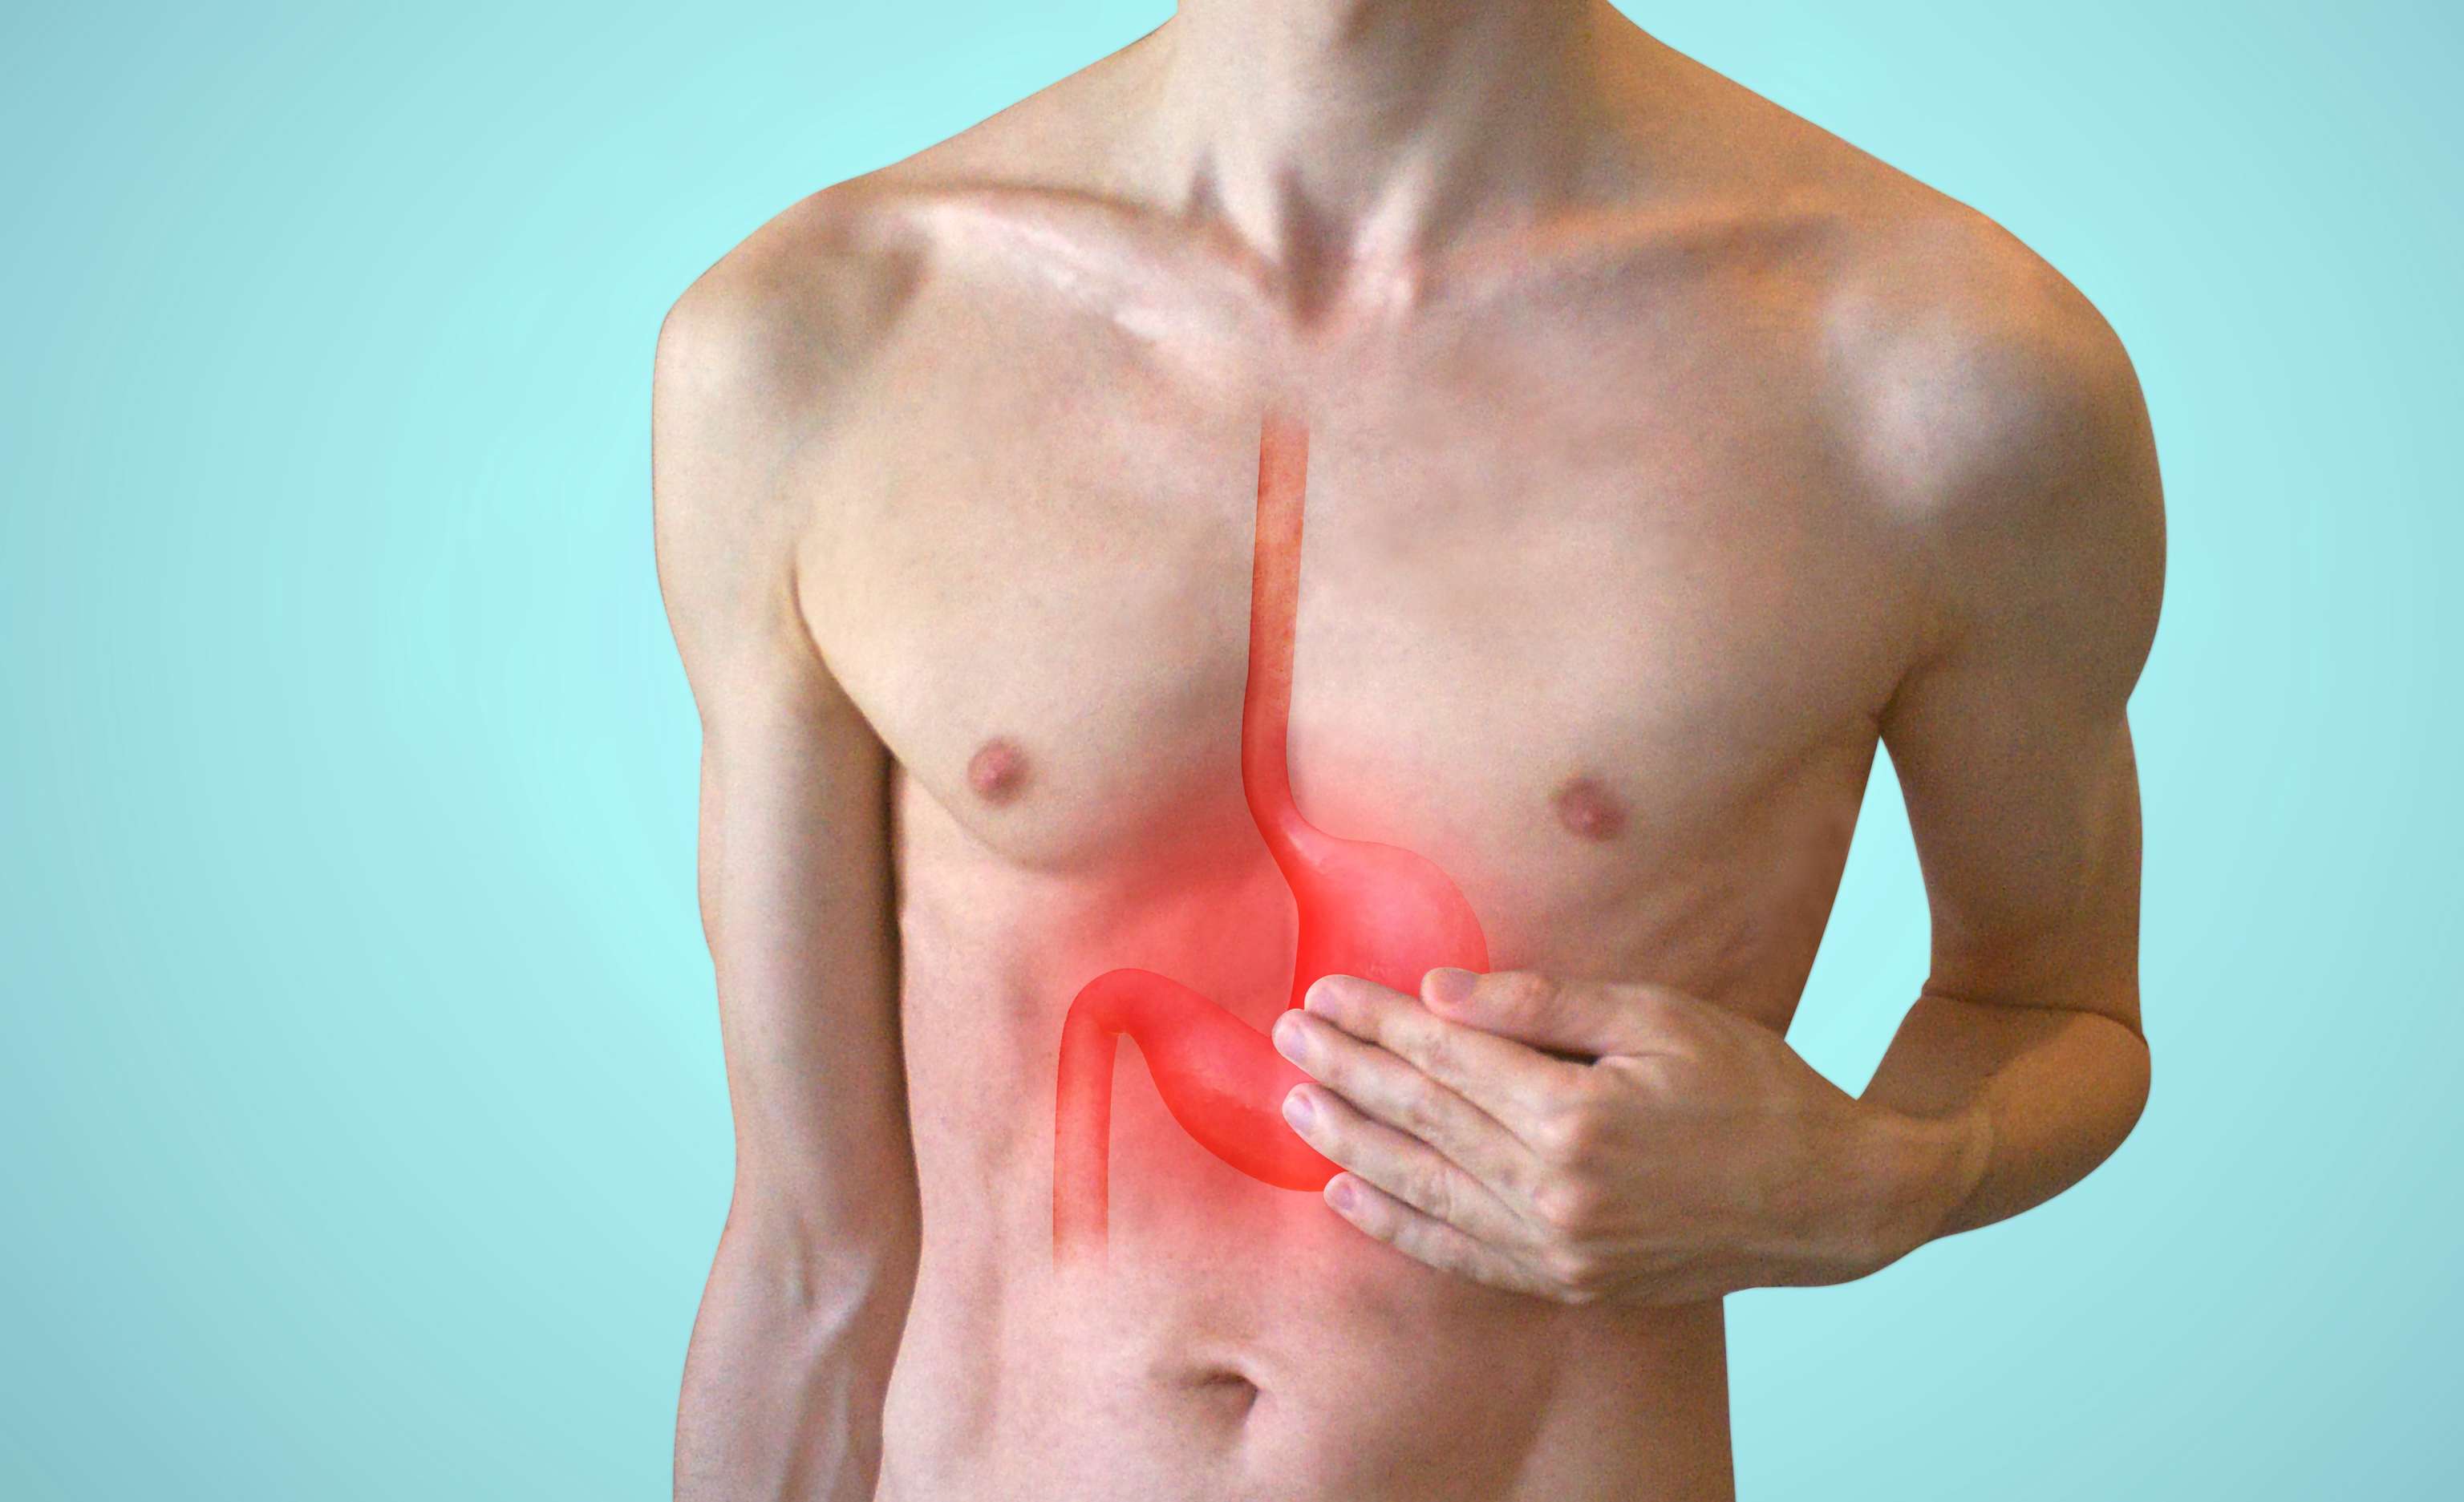 Image of upper body with stomach pain